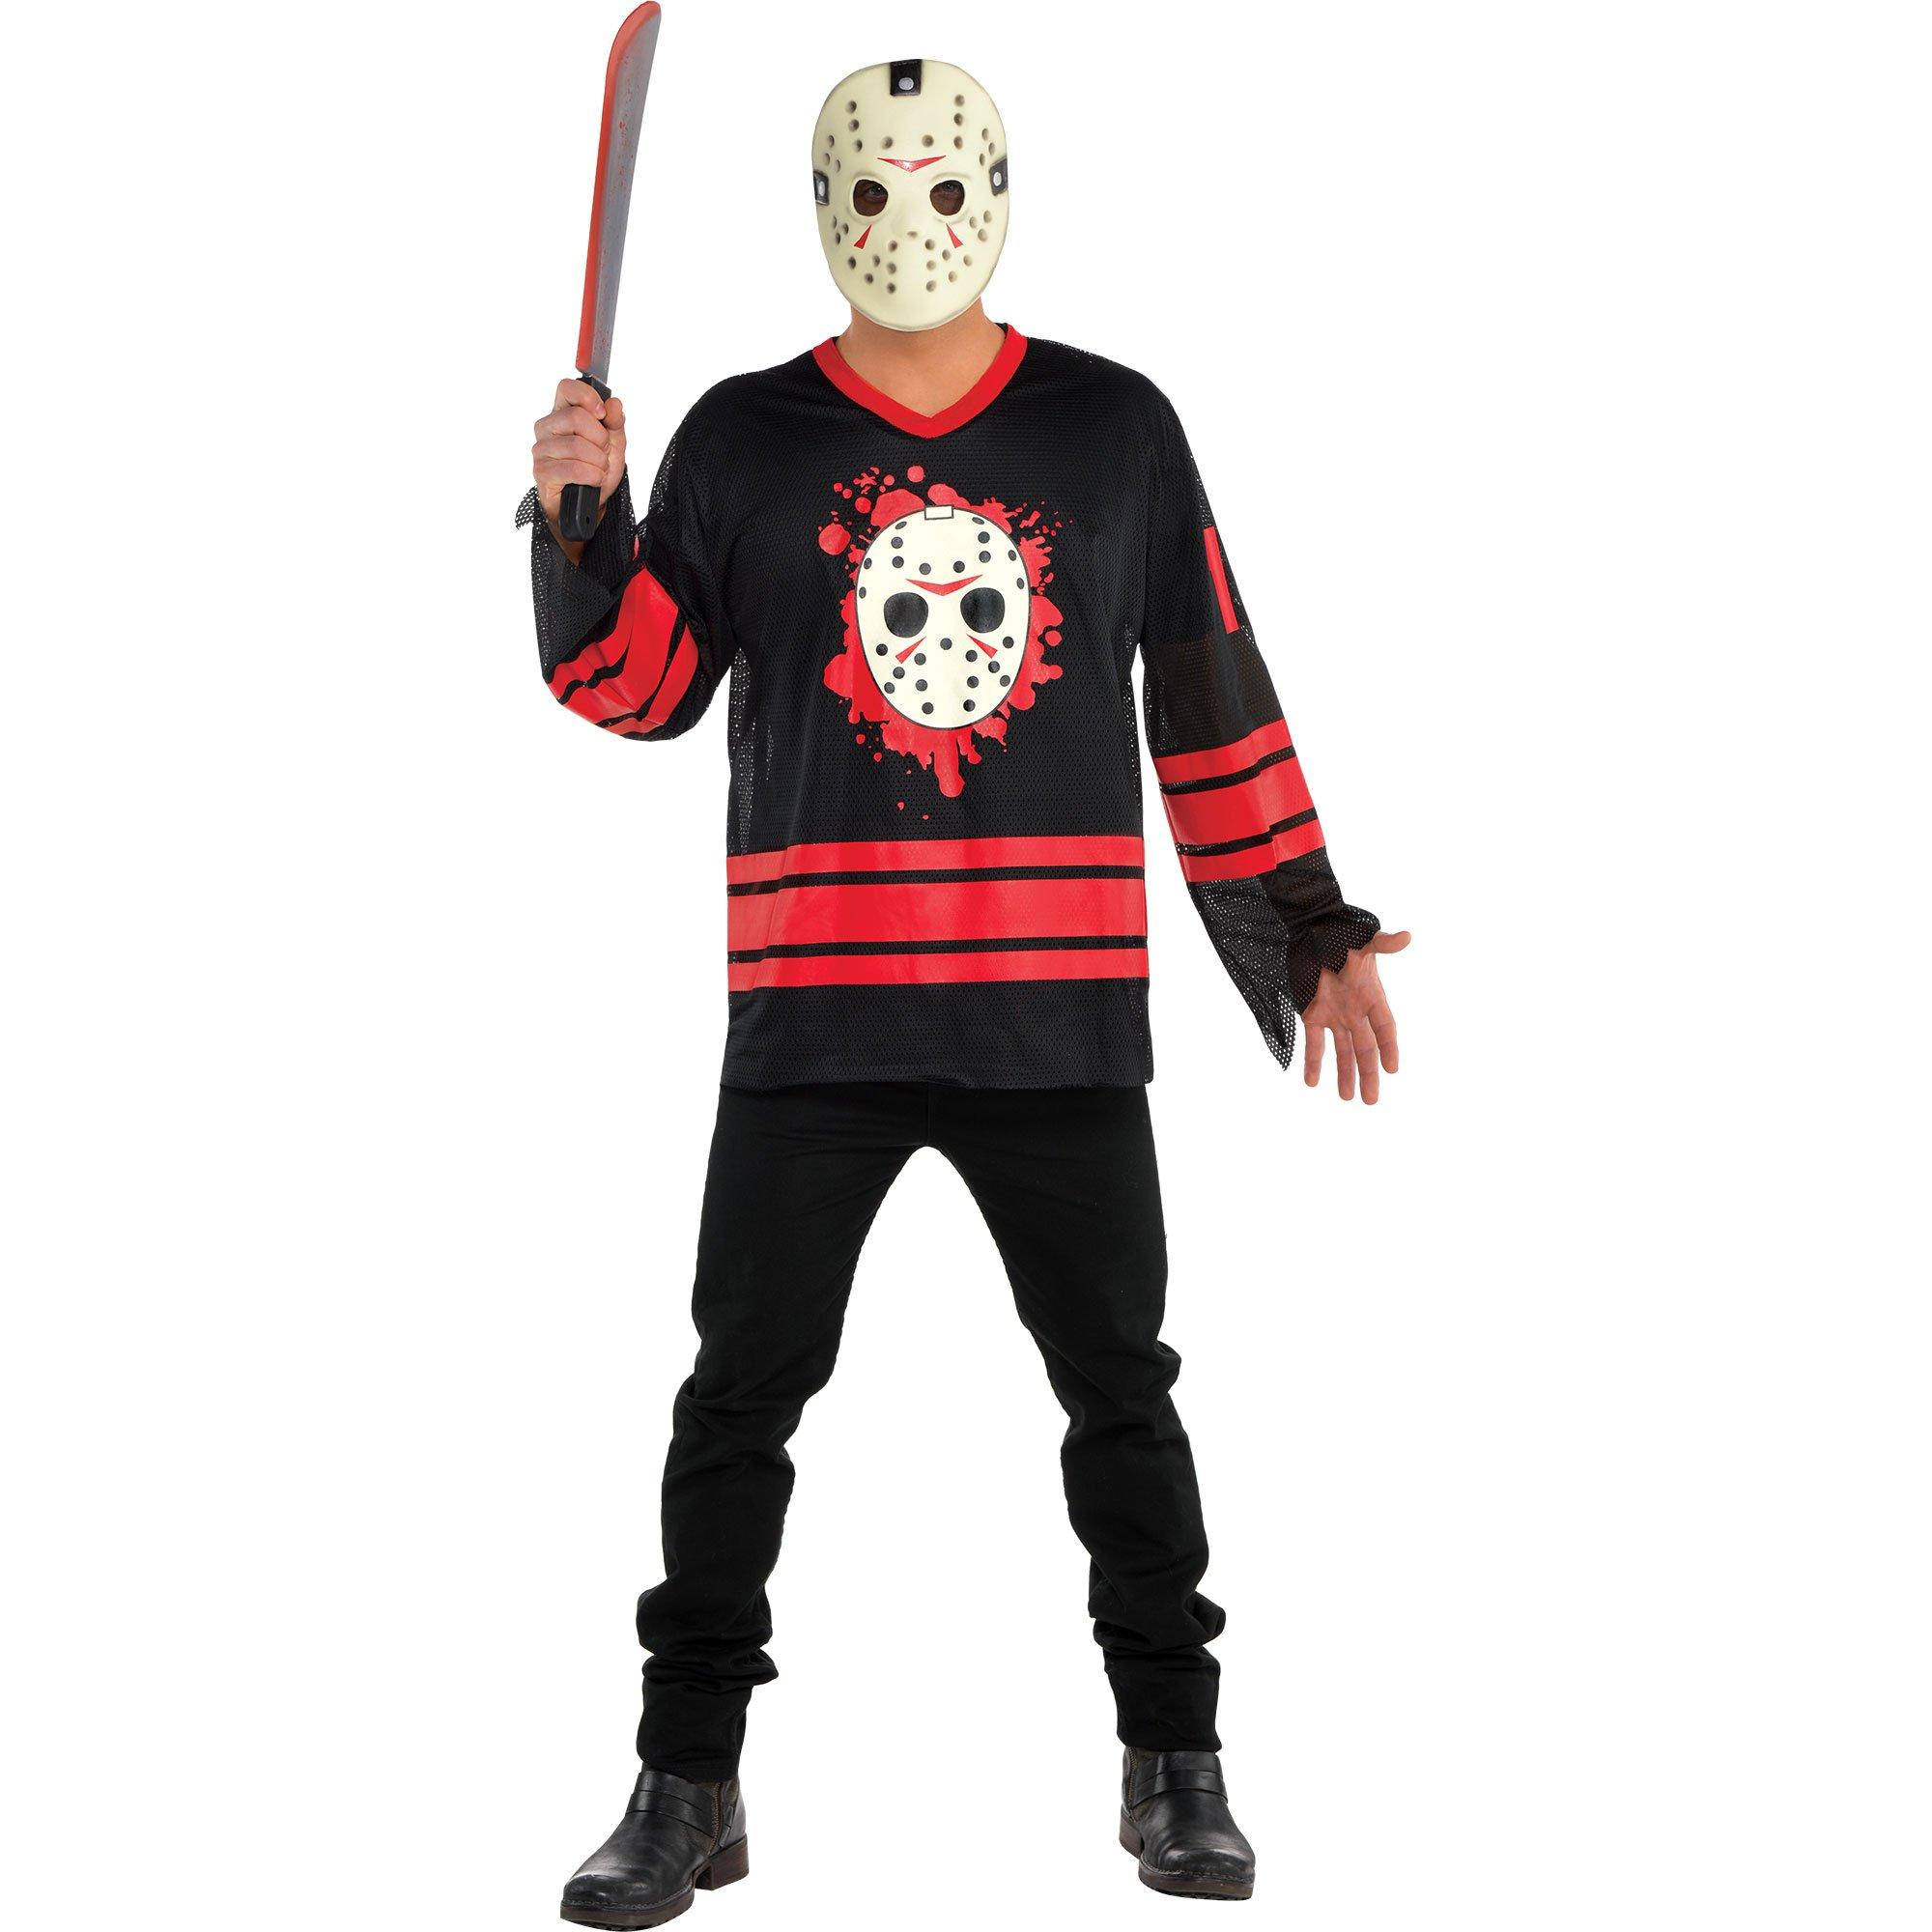 Jason Voorhees Couples Costumes - Friday the 13th